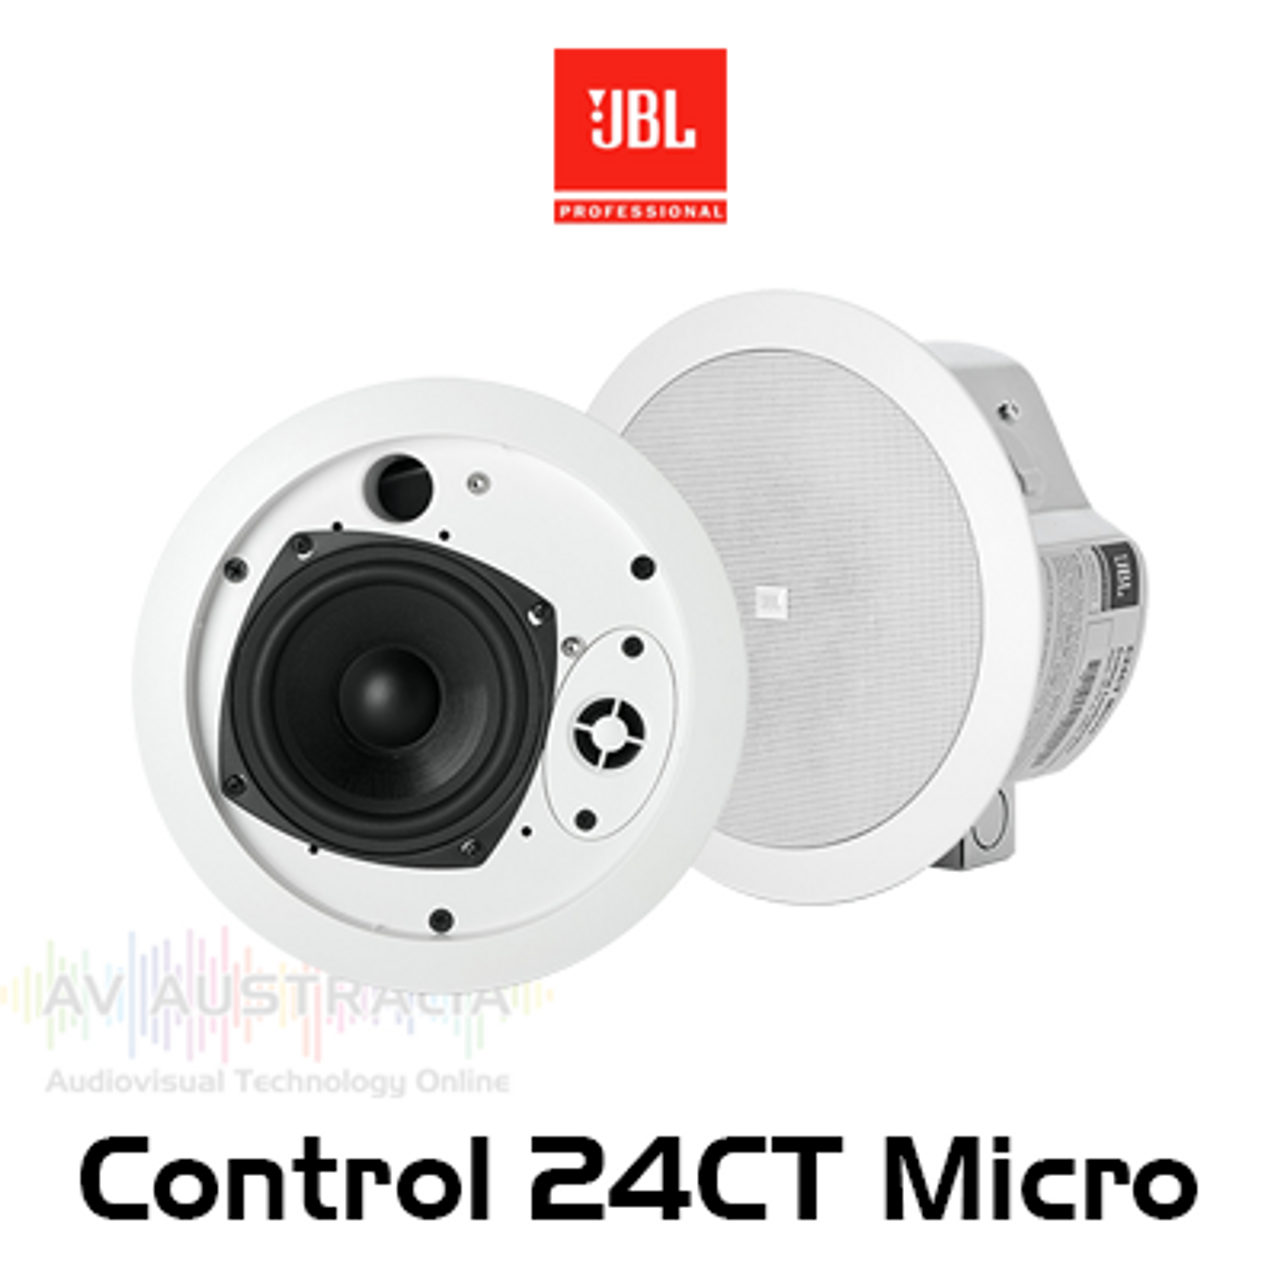 JBL Control 24CT Micro 4.5" 70/100V Shallow Depth Background Music In-Ceiling Loudspeakers (Pair)